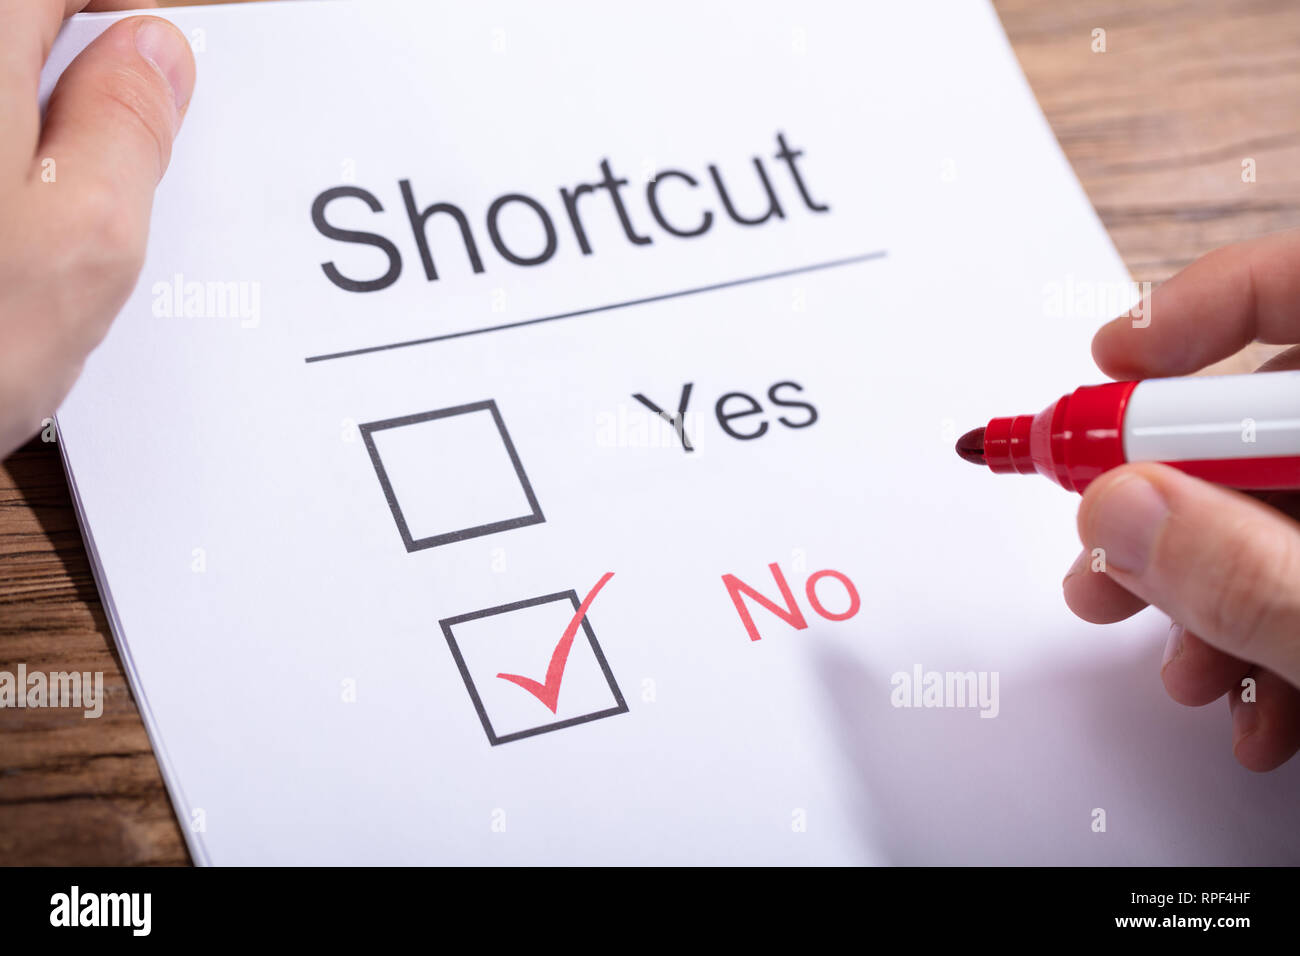 A Person Holding Marker Over Paper With Shortcuts Word Showing Yes And No Option Stock Photo